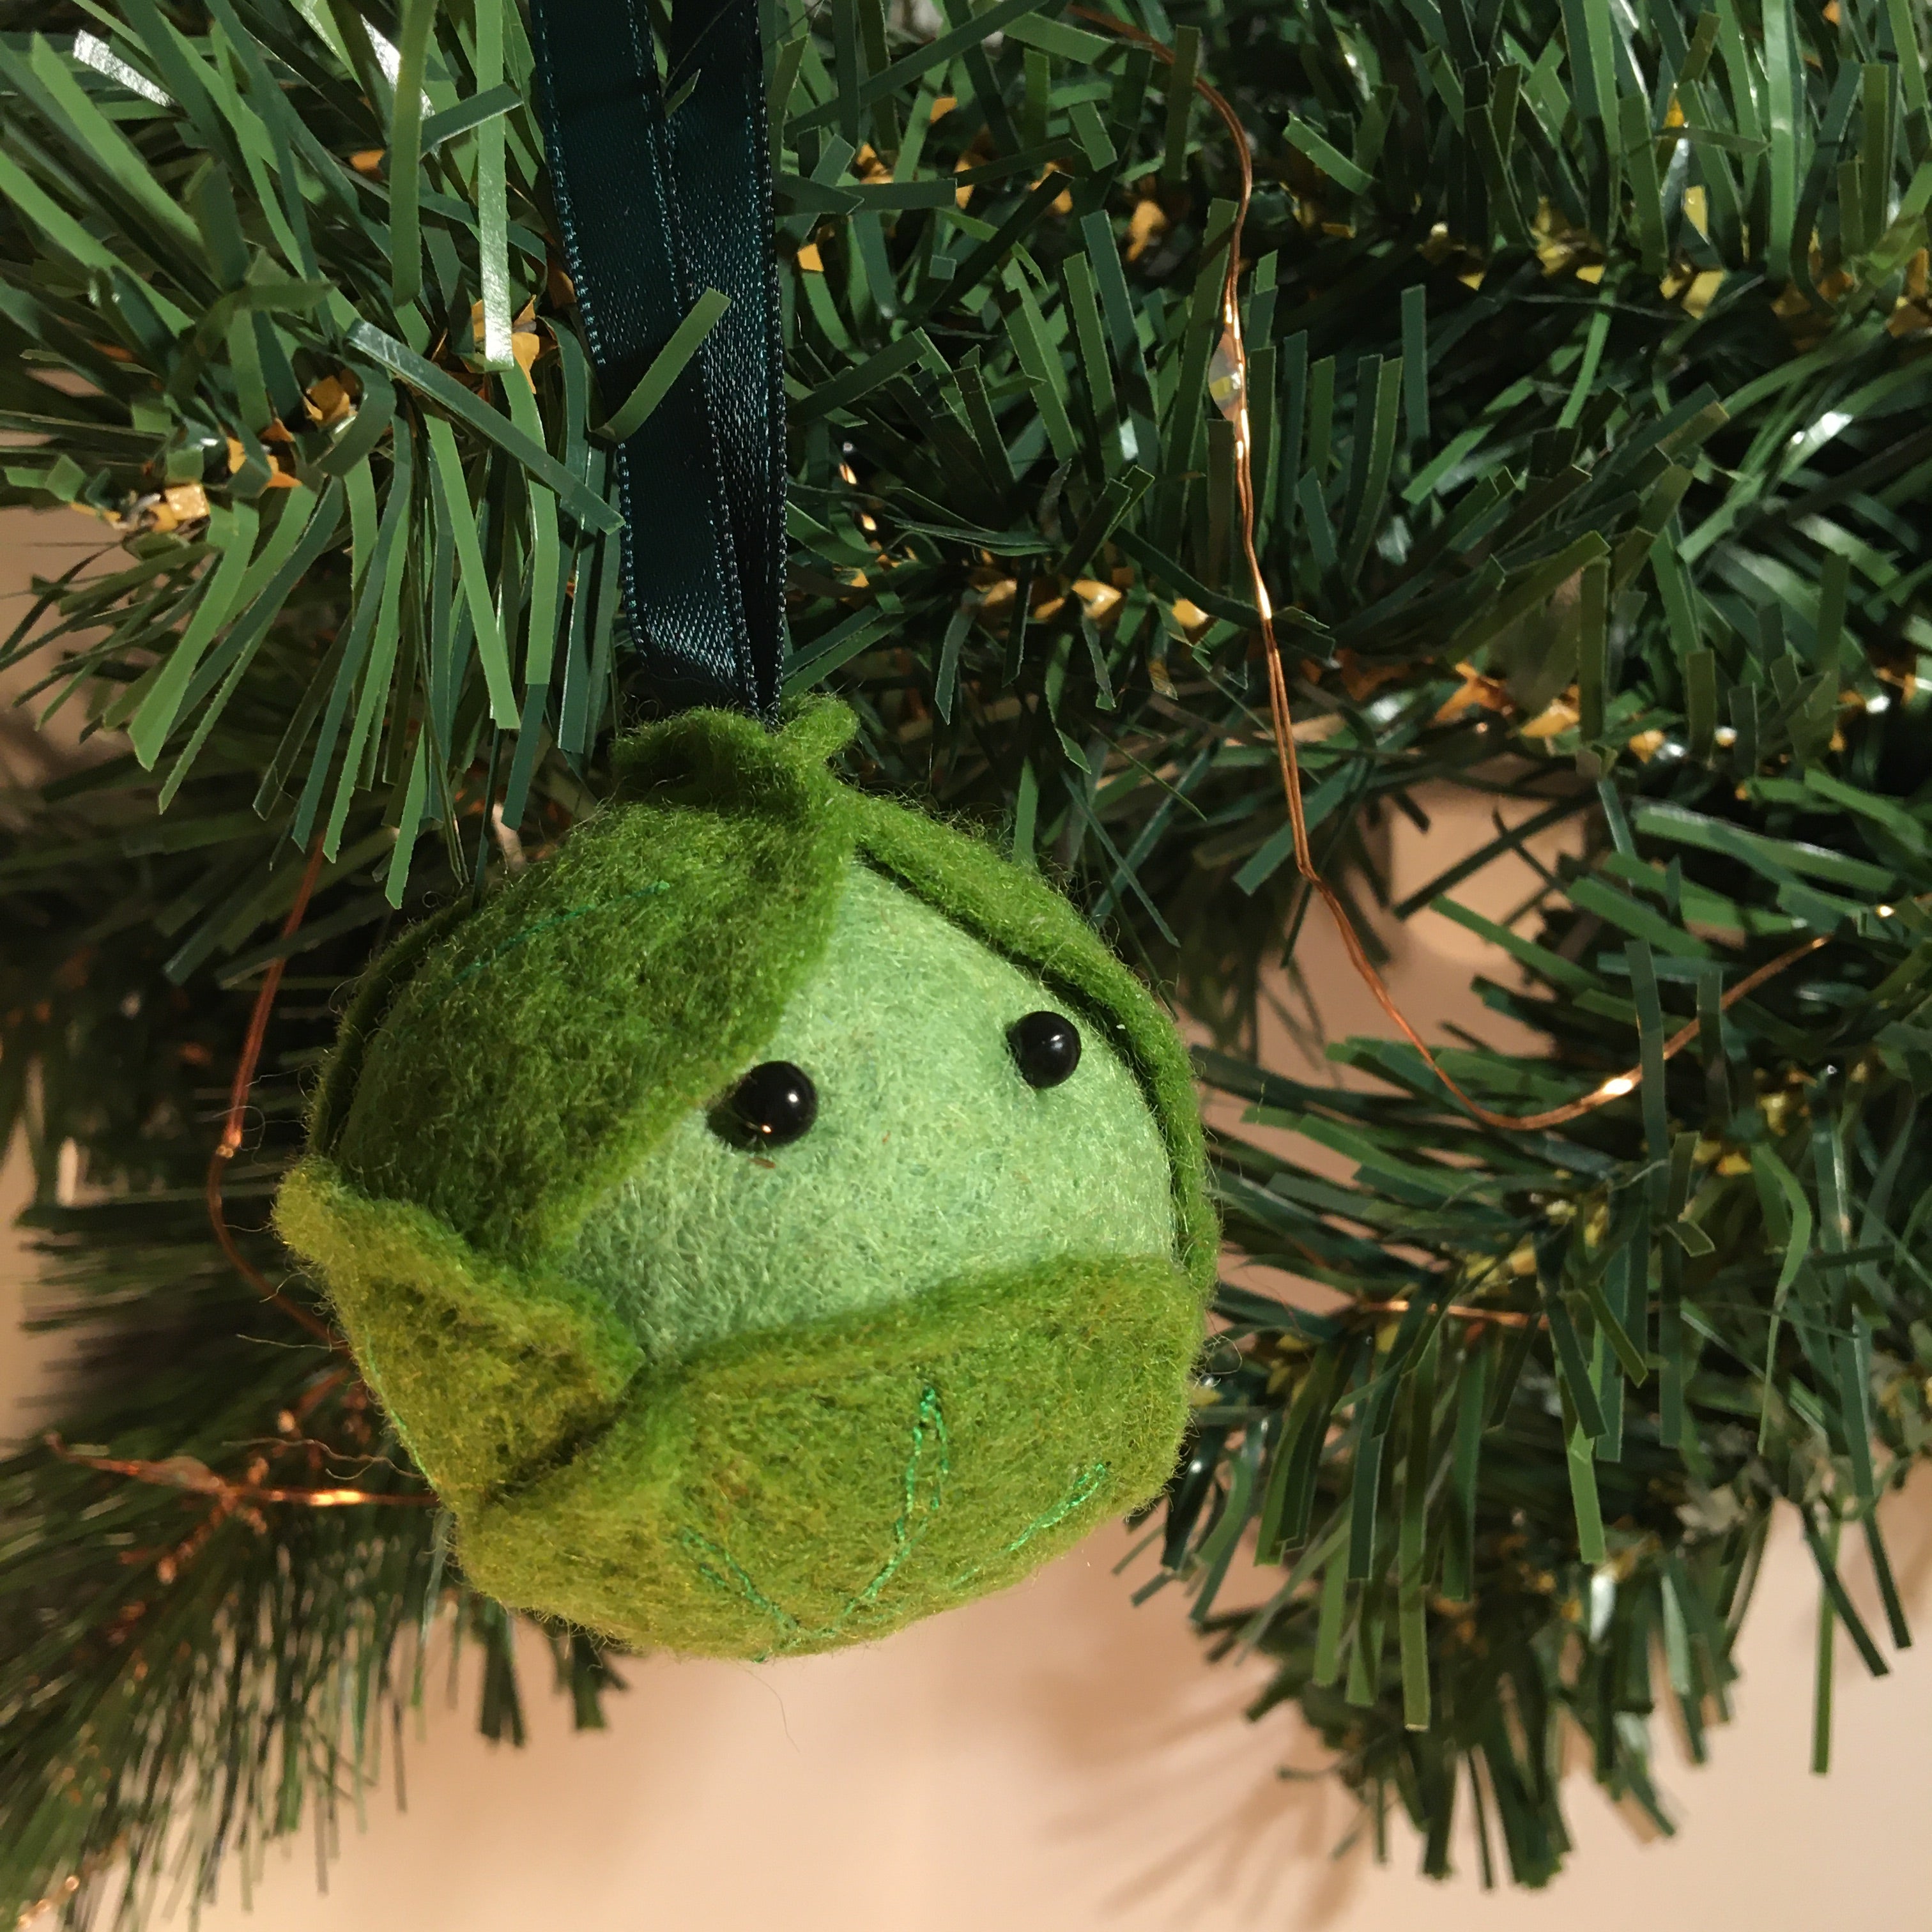 Brussel sprout decoration